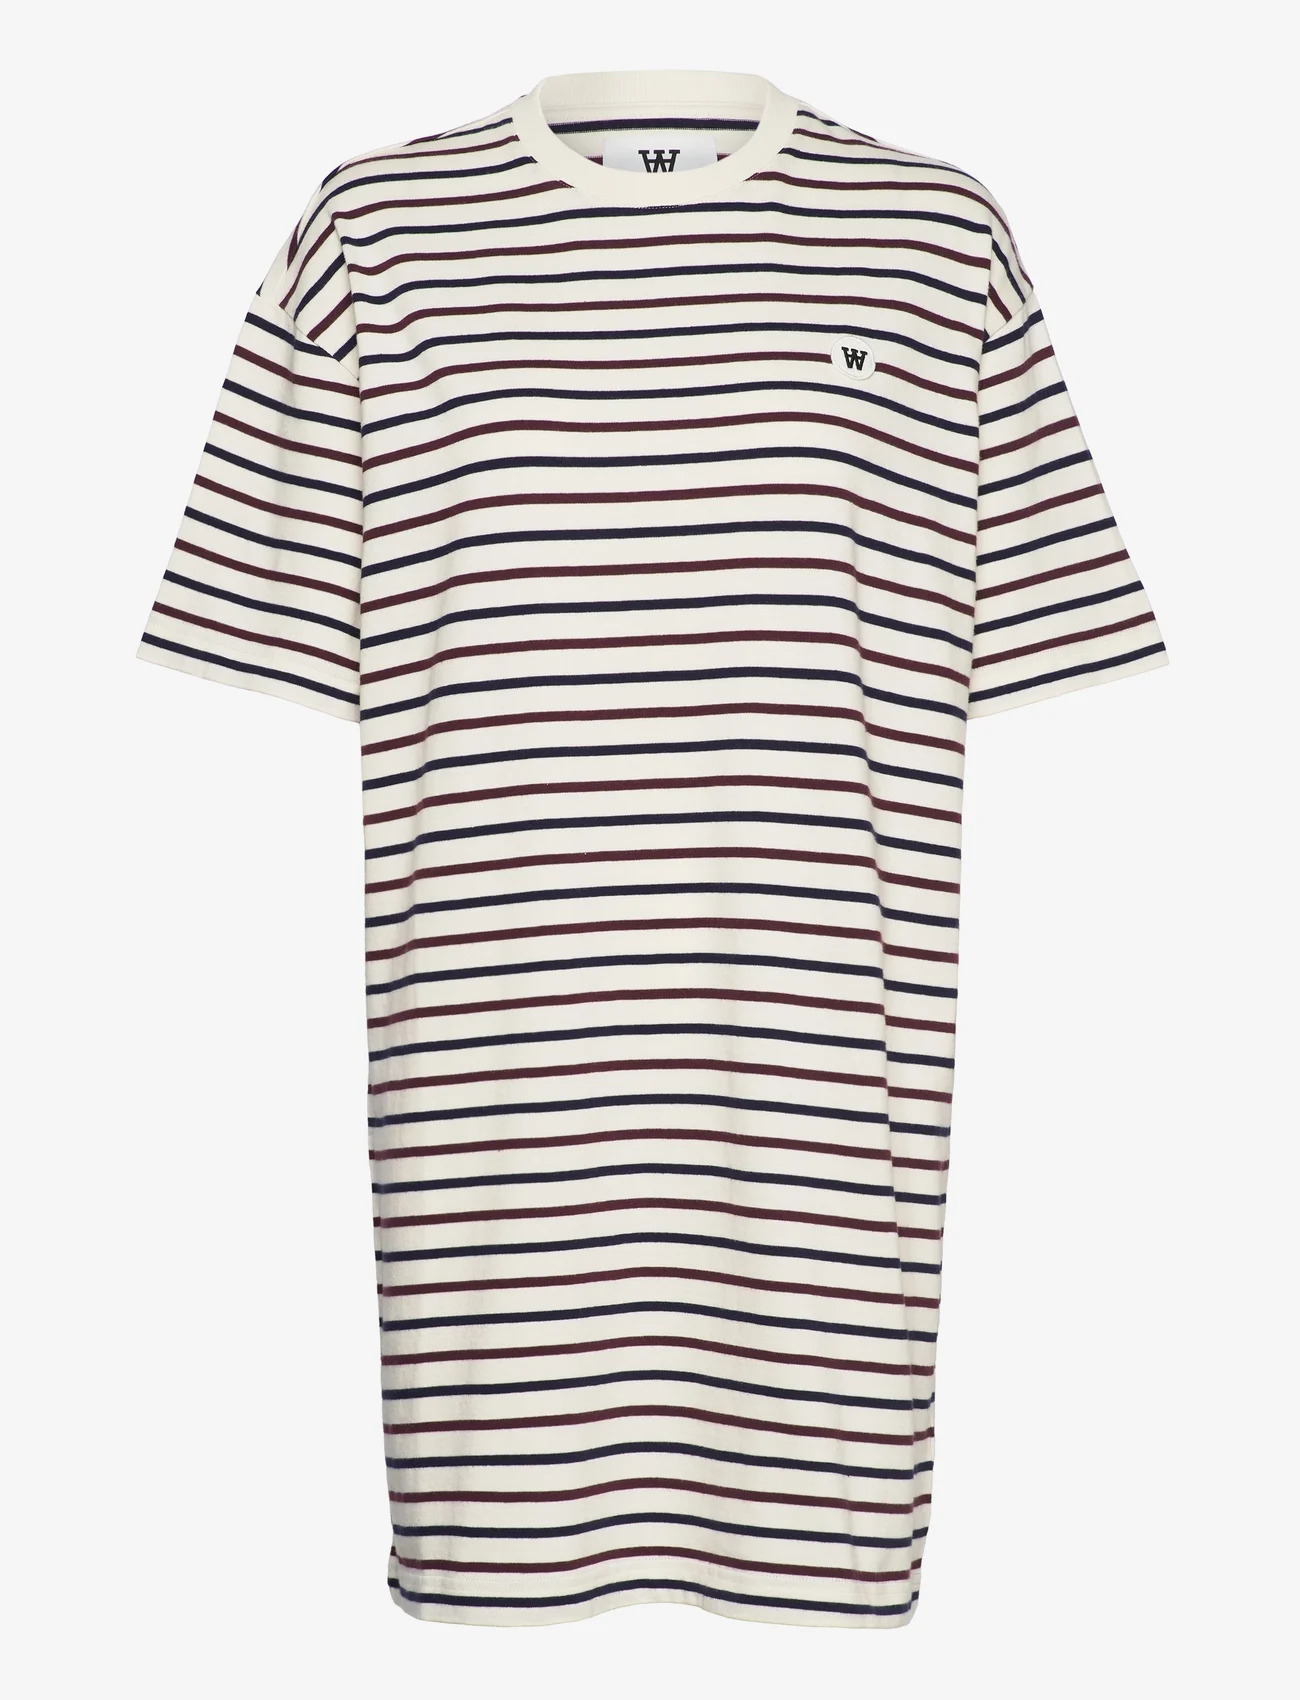 Double A by Wood Wood - Ulla stripe dress - t-shirt dresses - off-white/burgundy stripes - 0